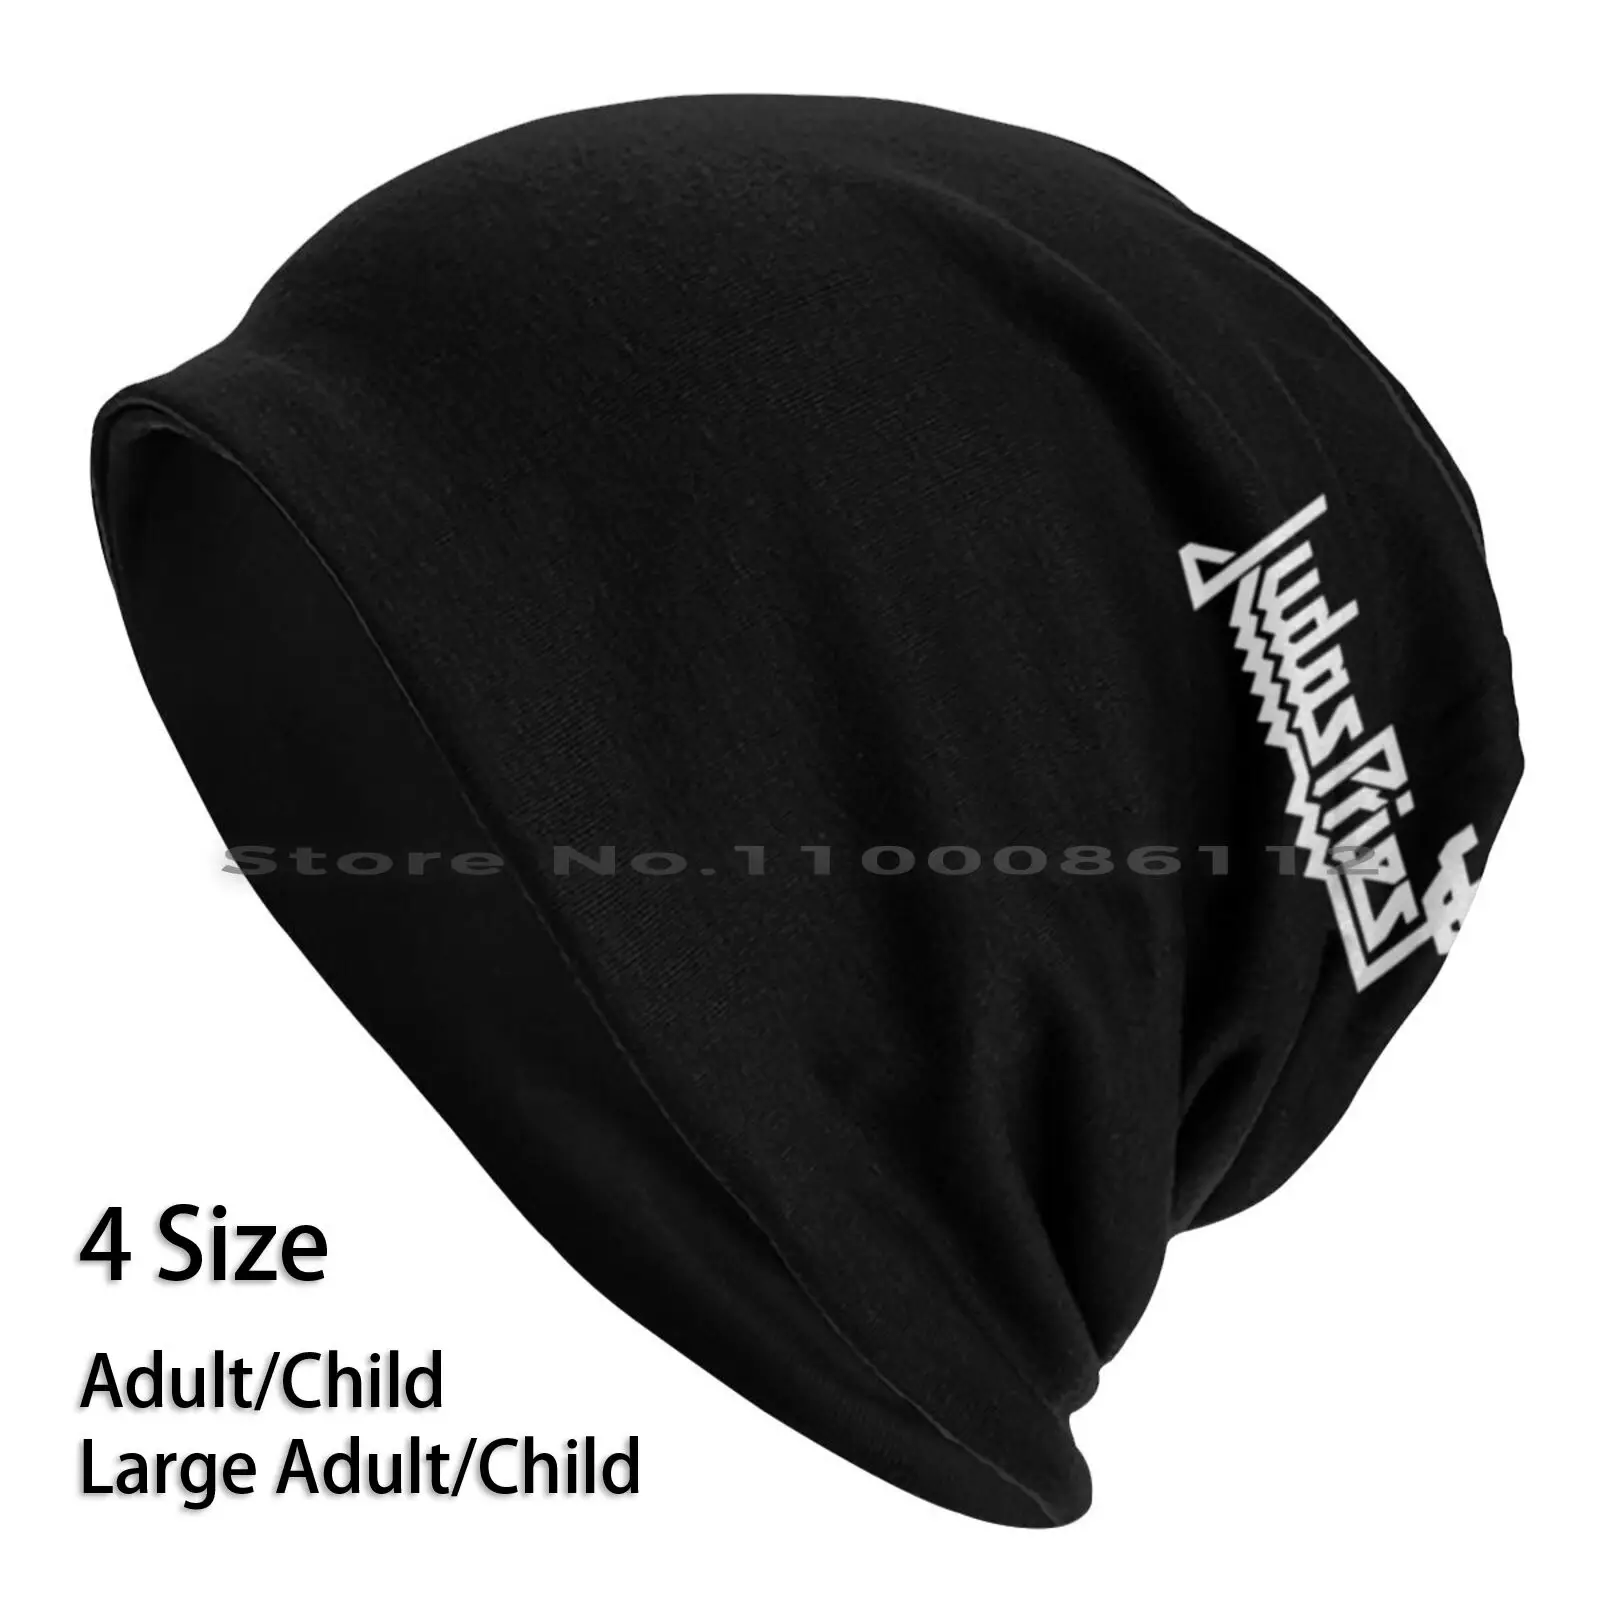 

Official Beanies Knit Hat Music Amplification Guitar Sound Judas Priest Brimless Knitted Hat Skullcap Gift Casual Creative